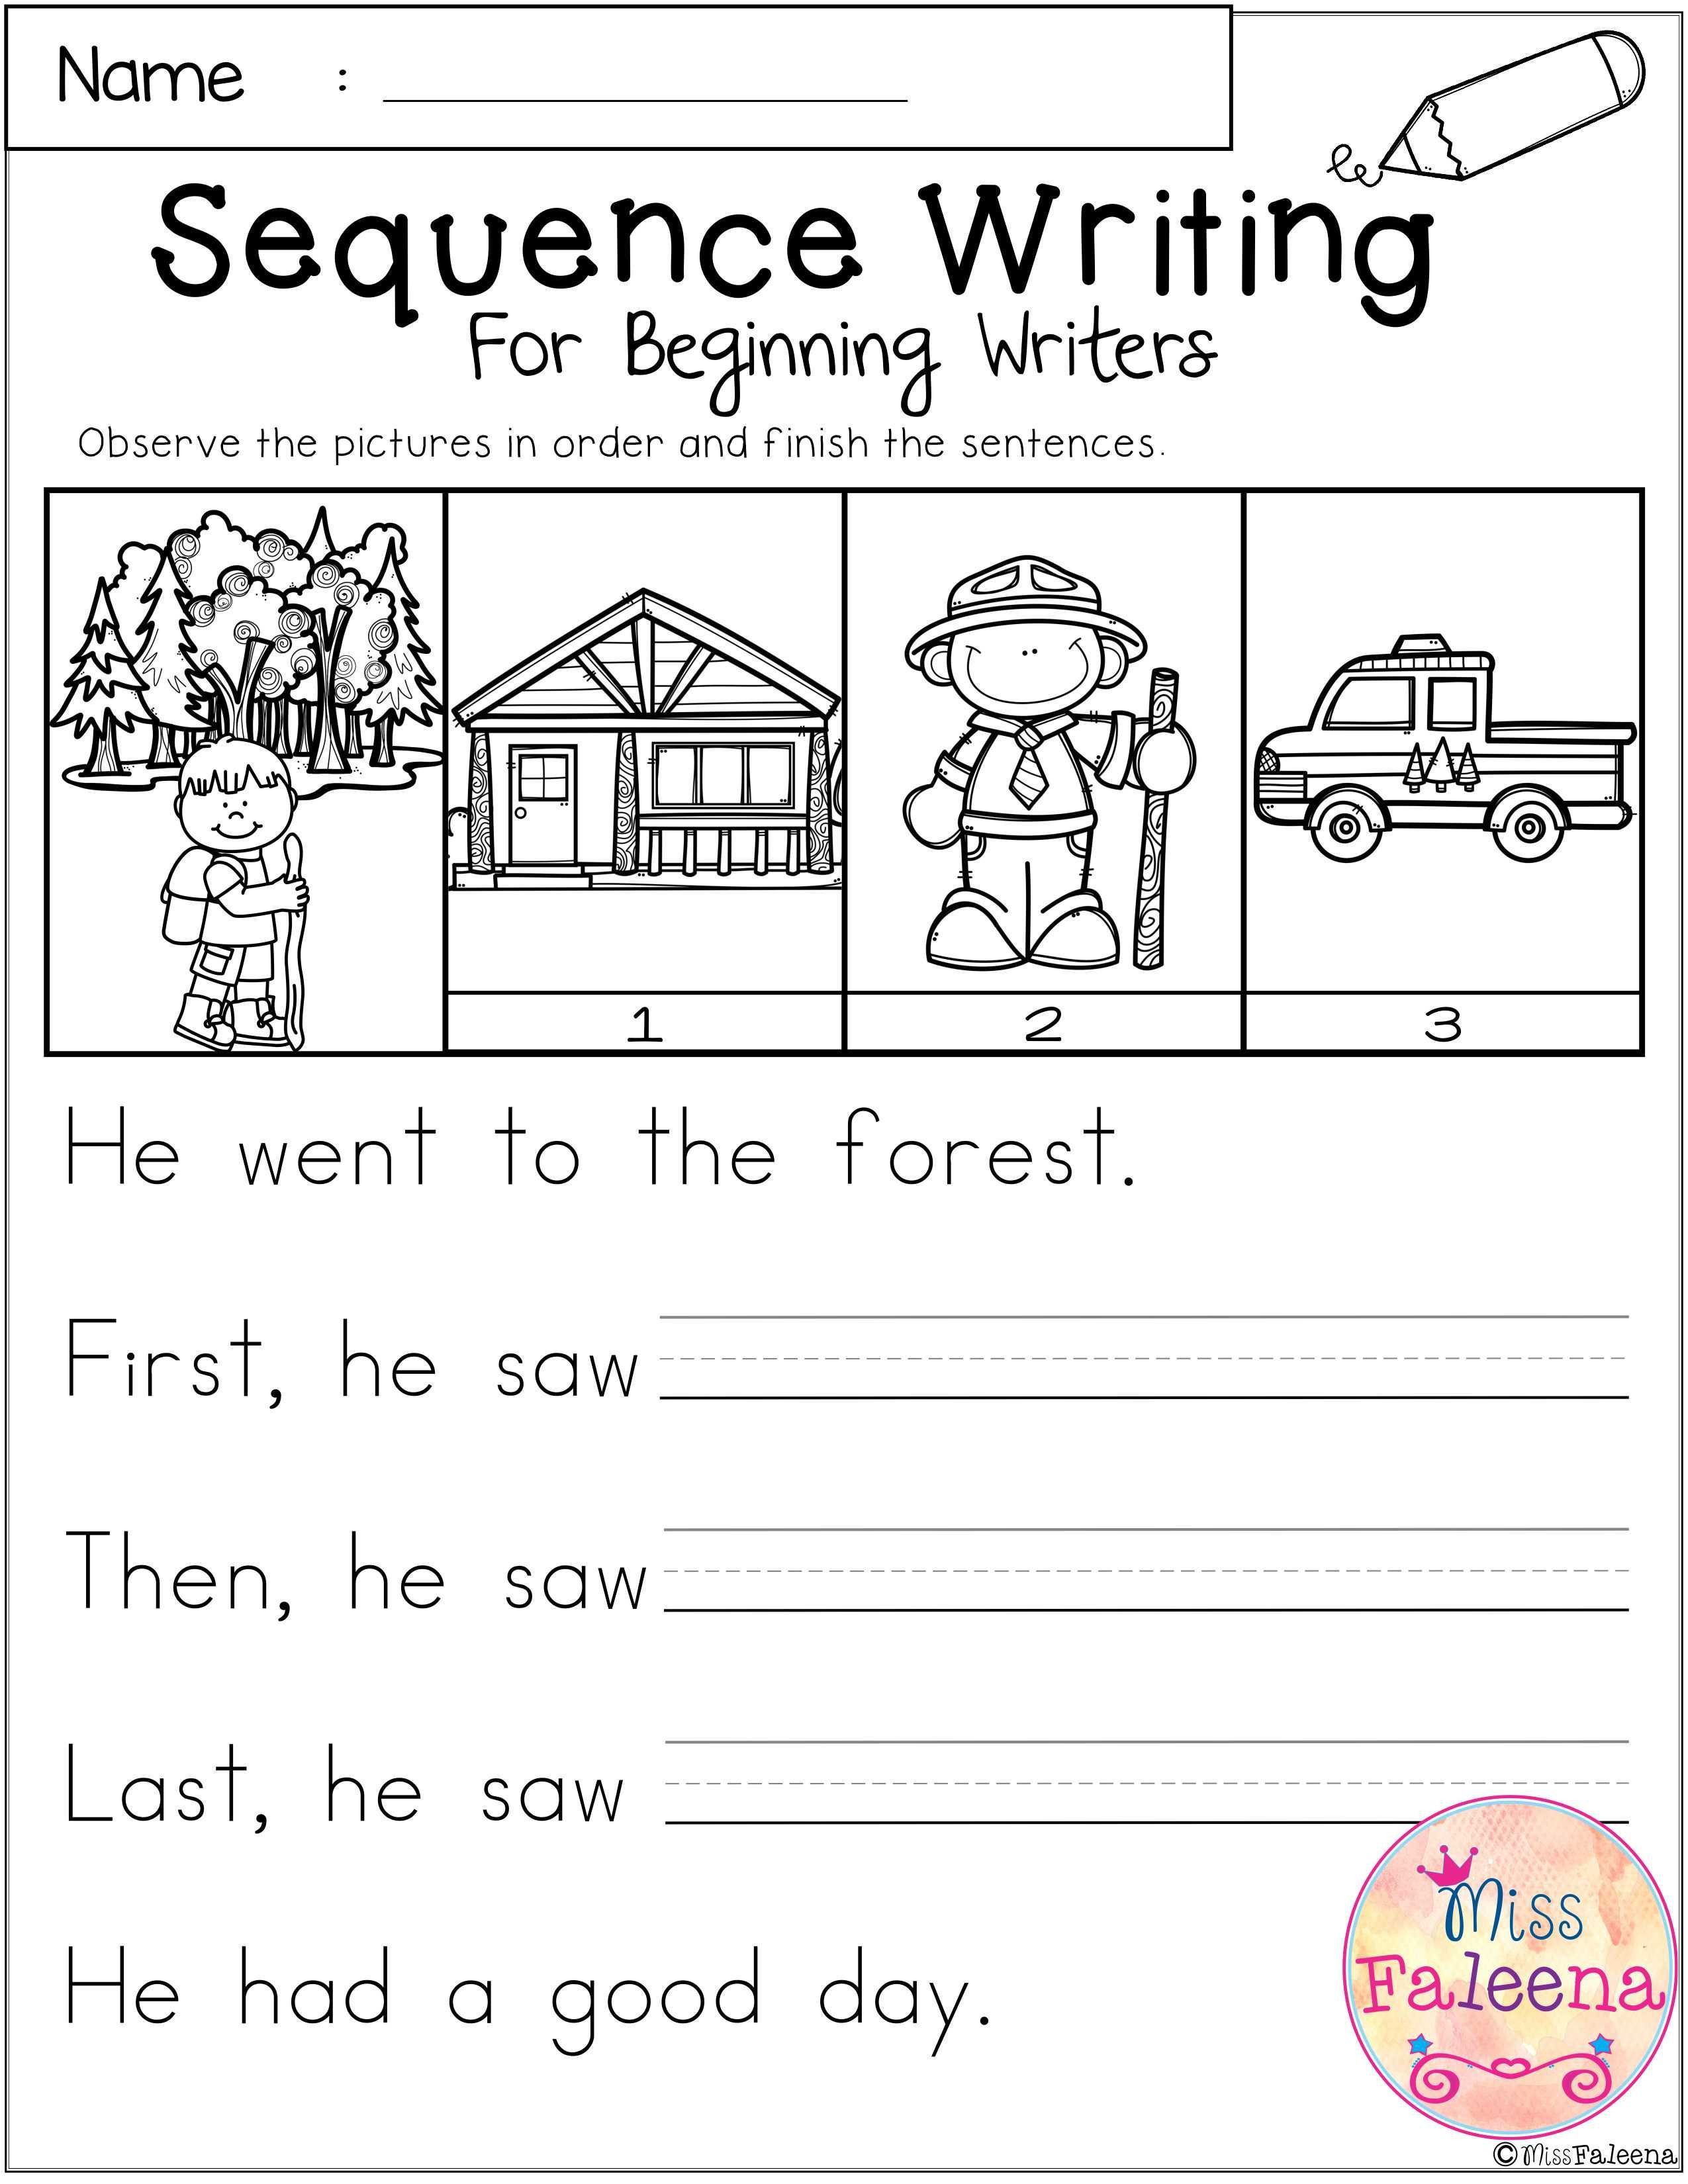 Sequencing Worksheets for 1st Grade September Sequence Writing for Beginning Writers